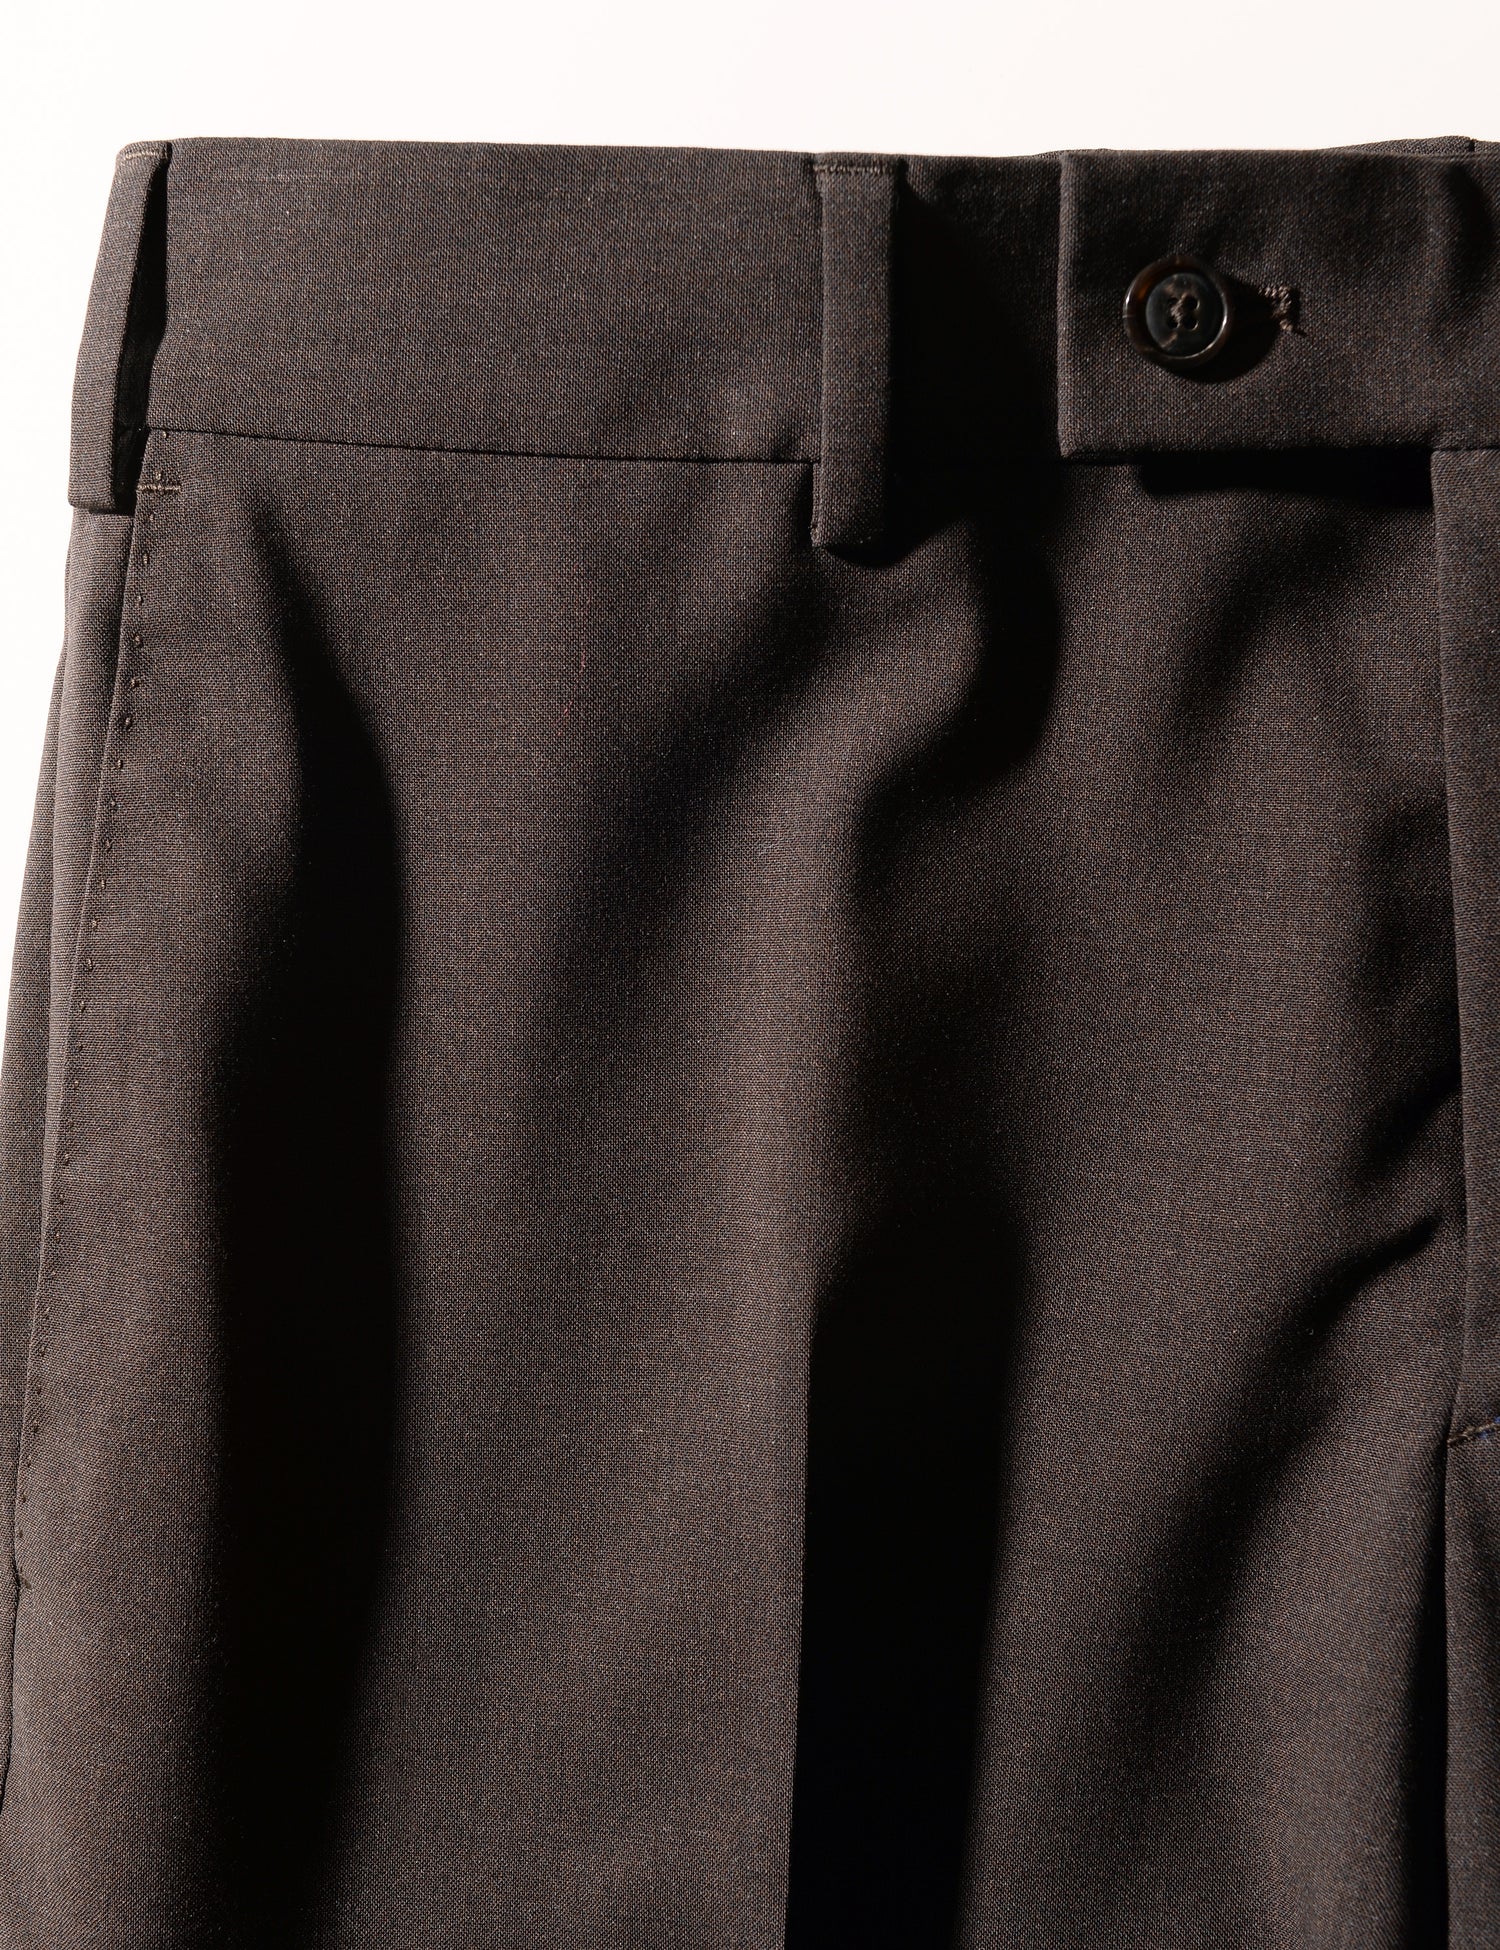 Detail shot of Brooklyn Tailors BKT50 Tailored Trousers in Heathered Plainweave - Charred Ember showing waistband and fabric texture